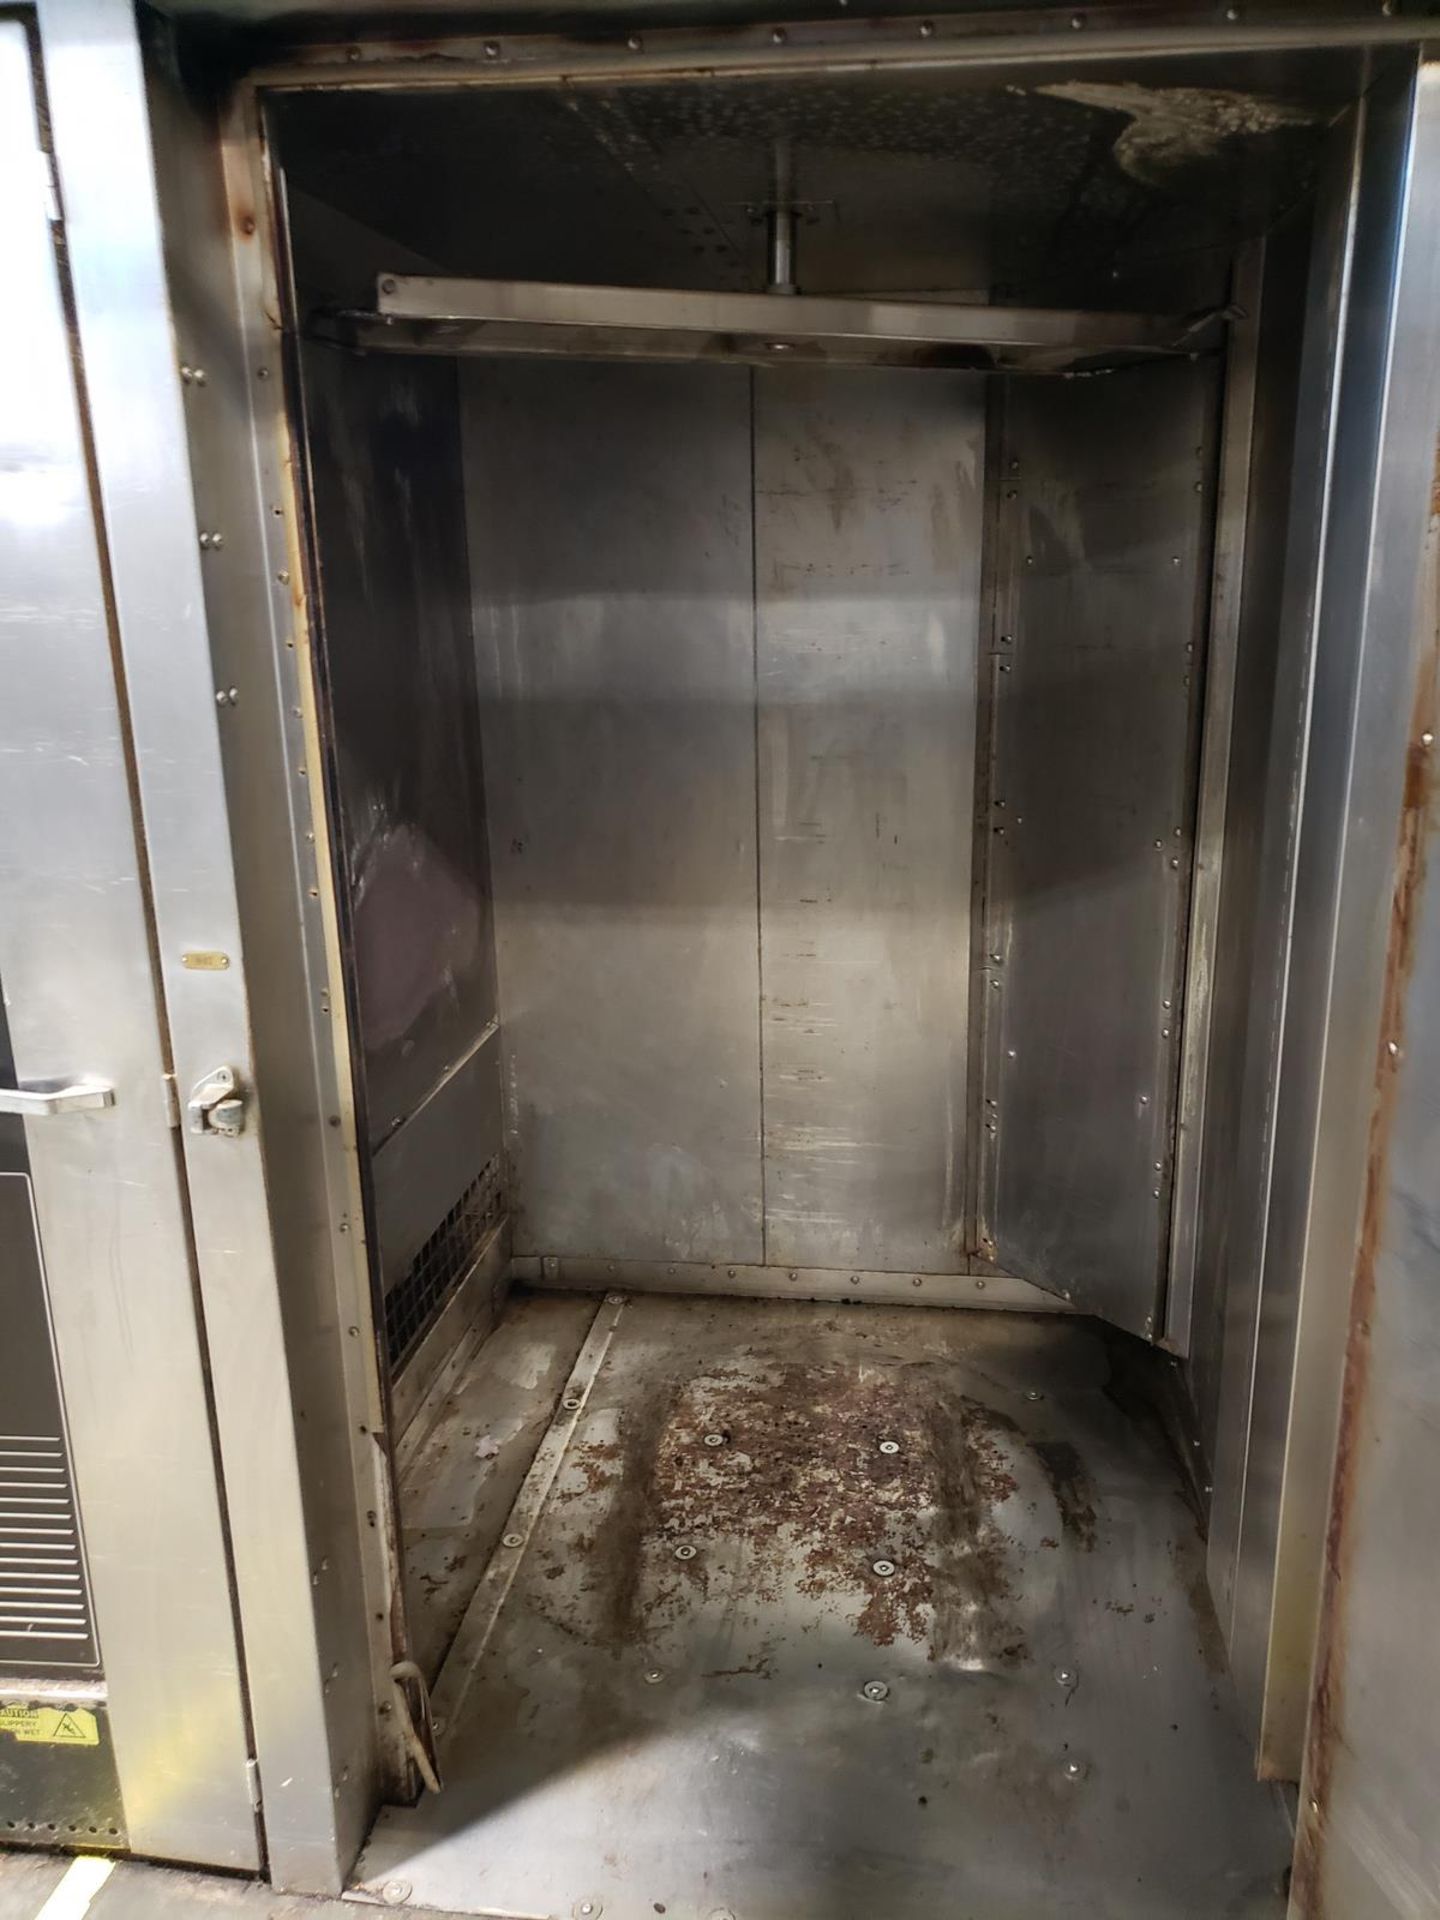 Baxter Rotating Rack Gas Oven, M# OV210G2, S/N 24-1018182 | Rig Fee: $2250 - Image 3 of 3